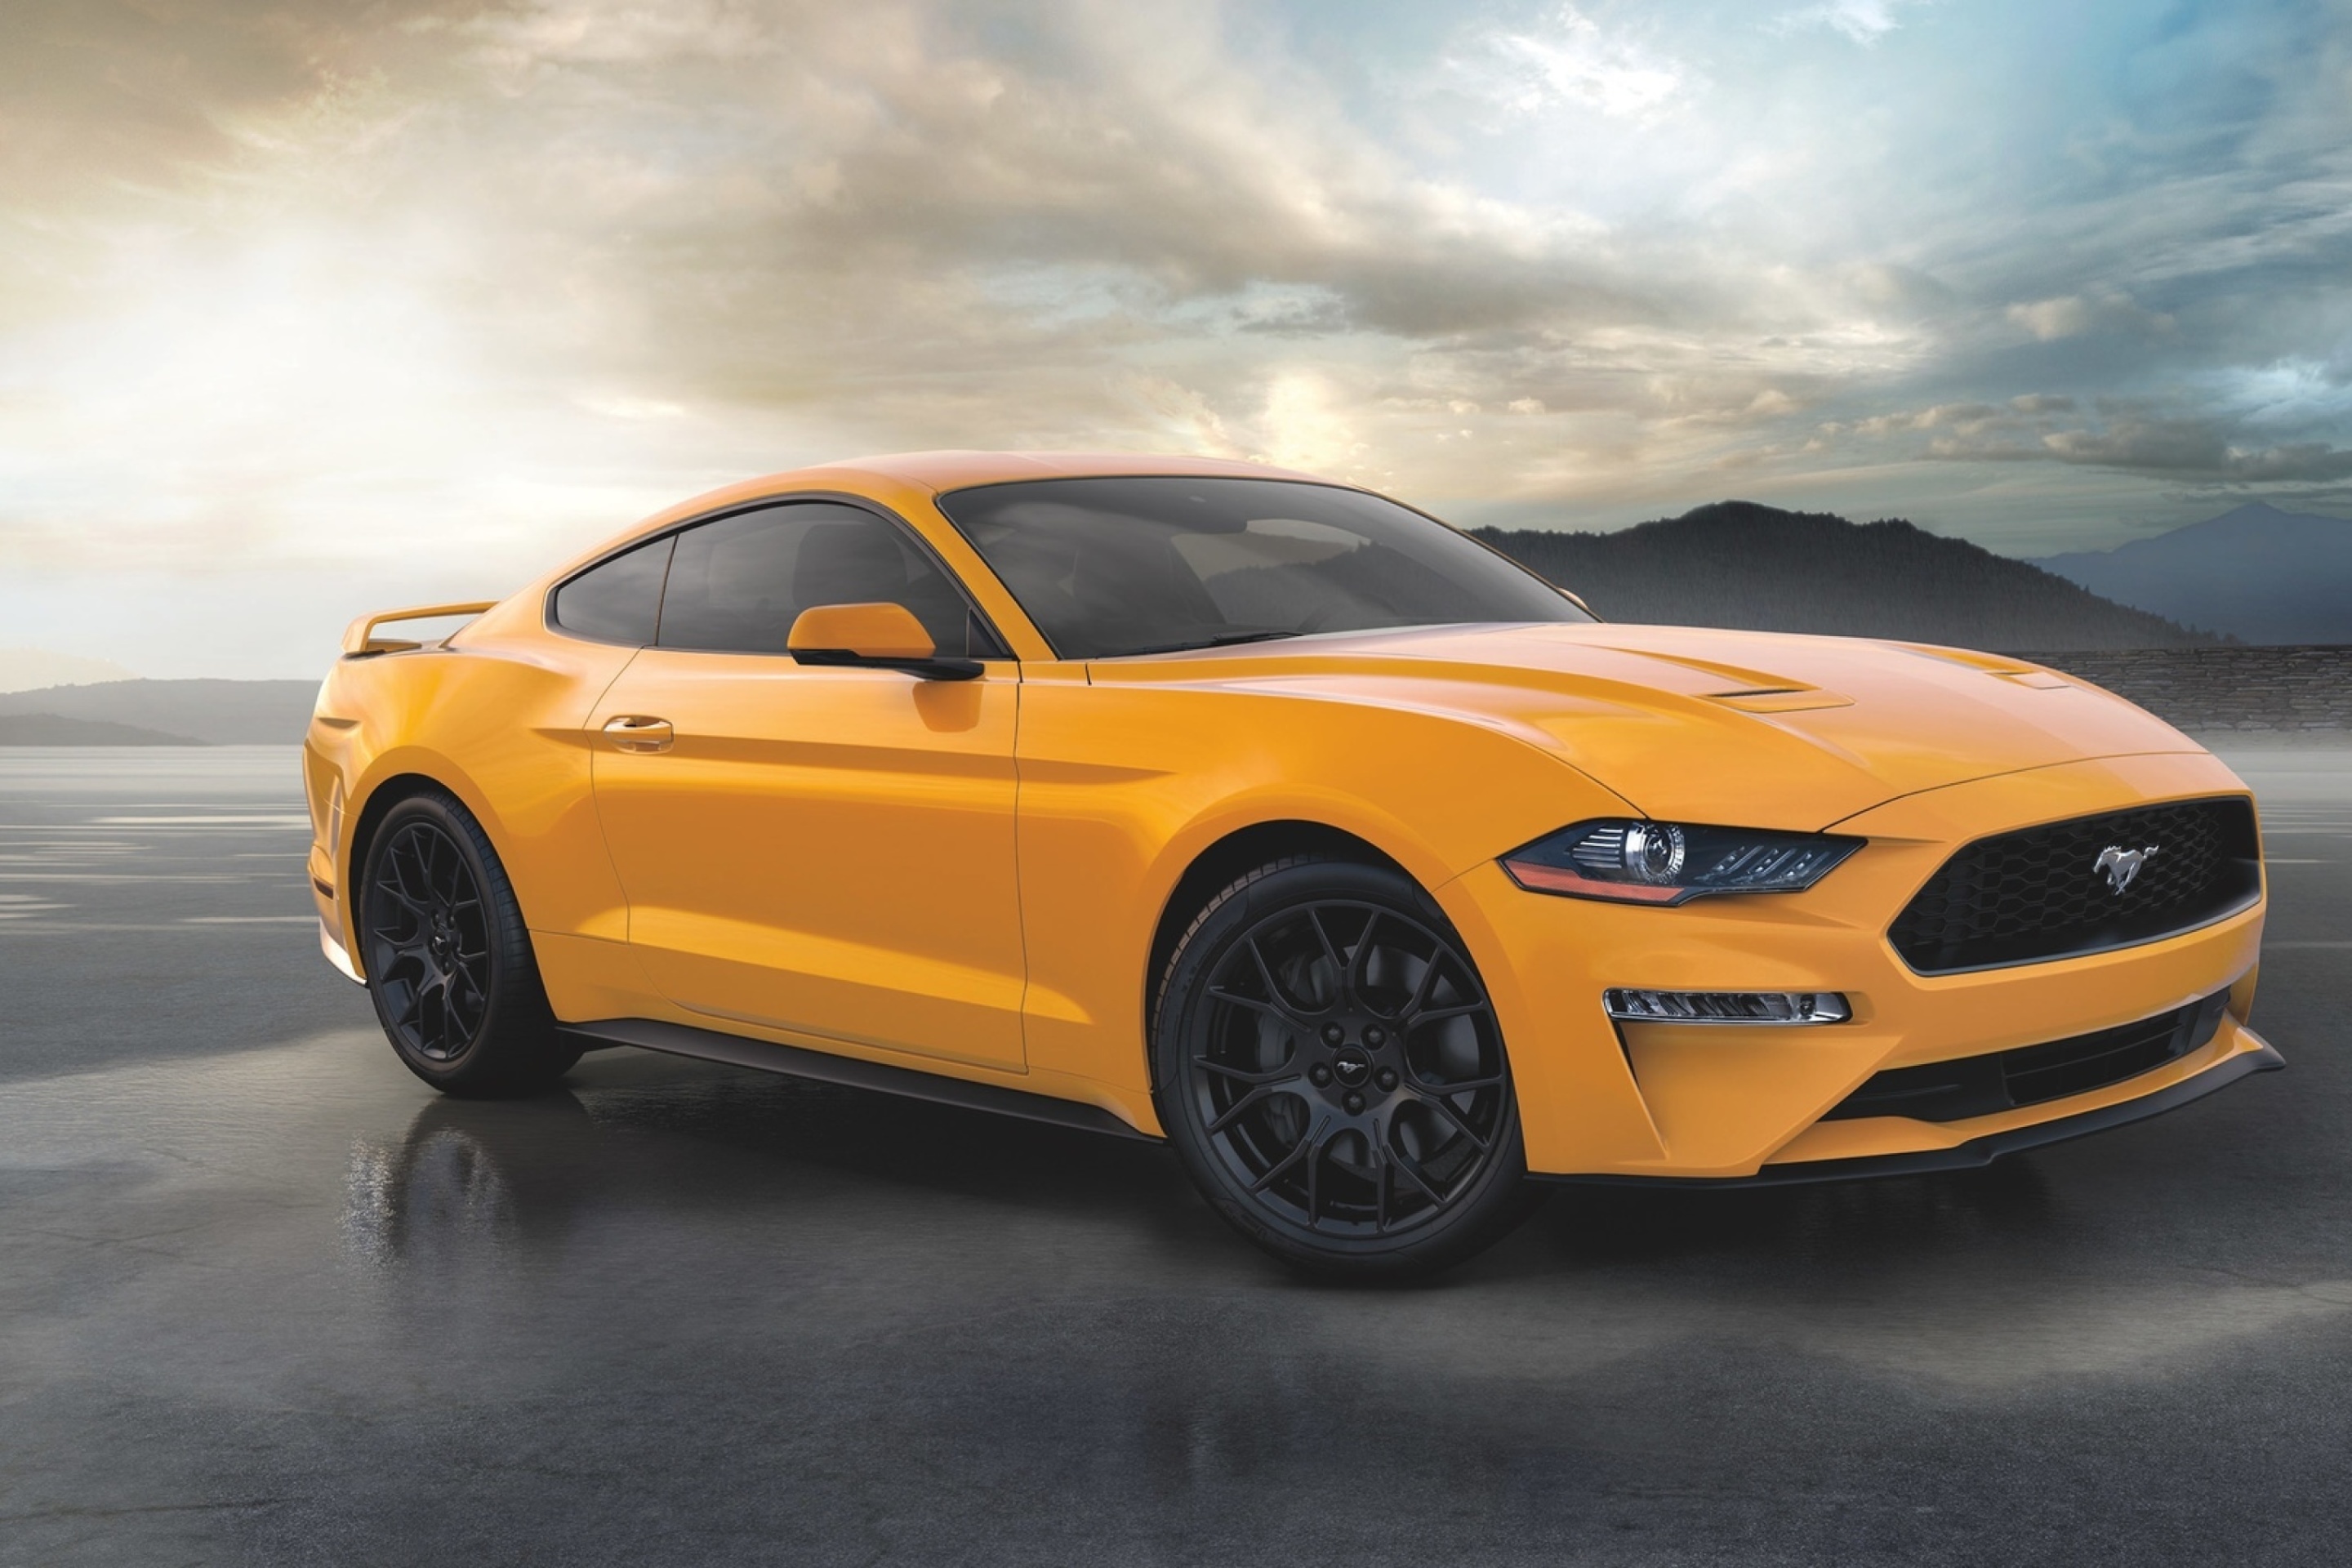 Ford Mustang Coupe wallpaper 2880x1920